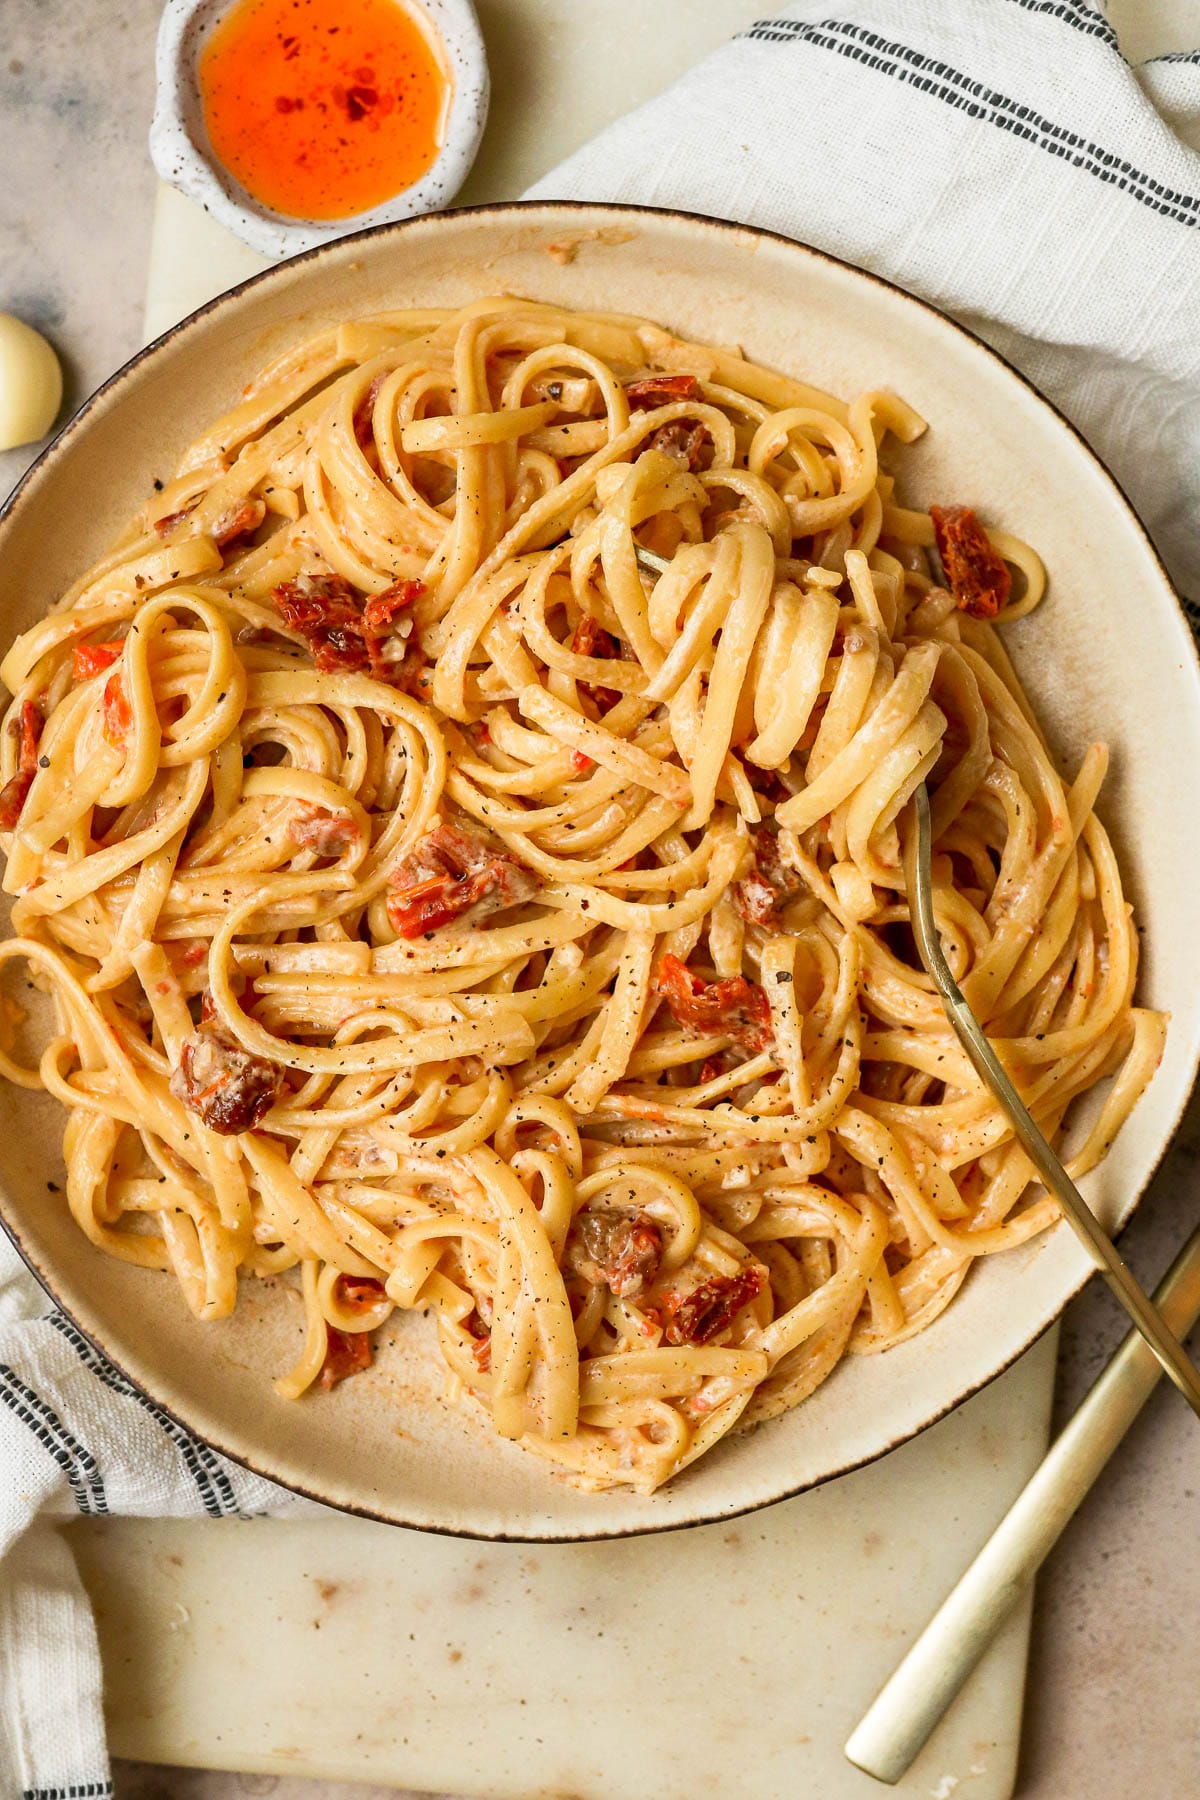 tomato pasta in a white bowl with a fork in the pasta.